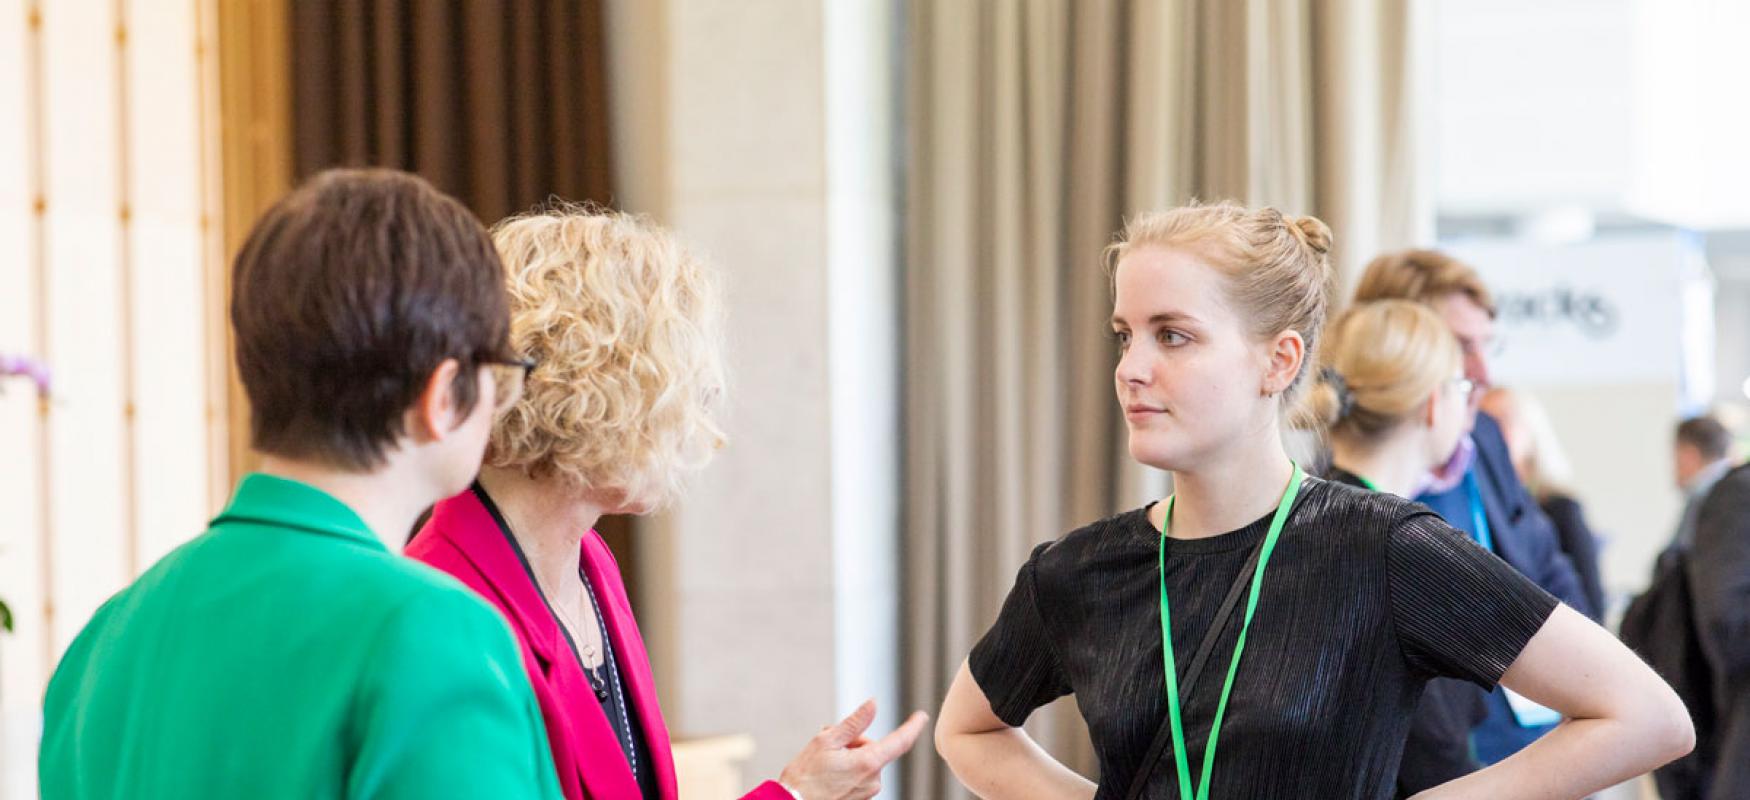 Frigg Harlung-Jensen discussing with colleagues at the WCEF2019